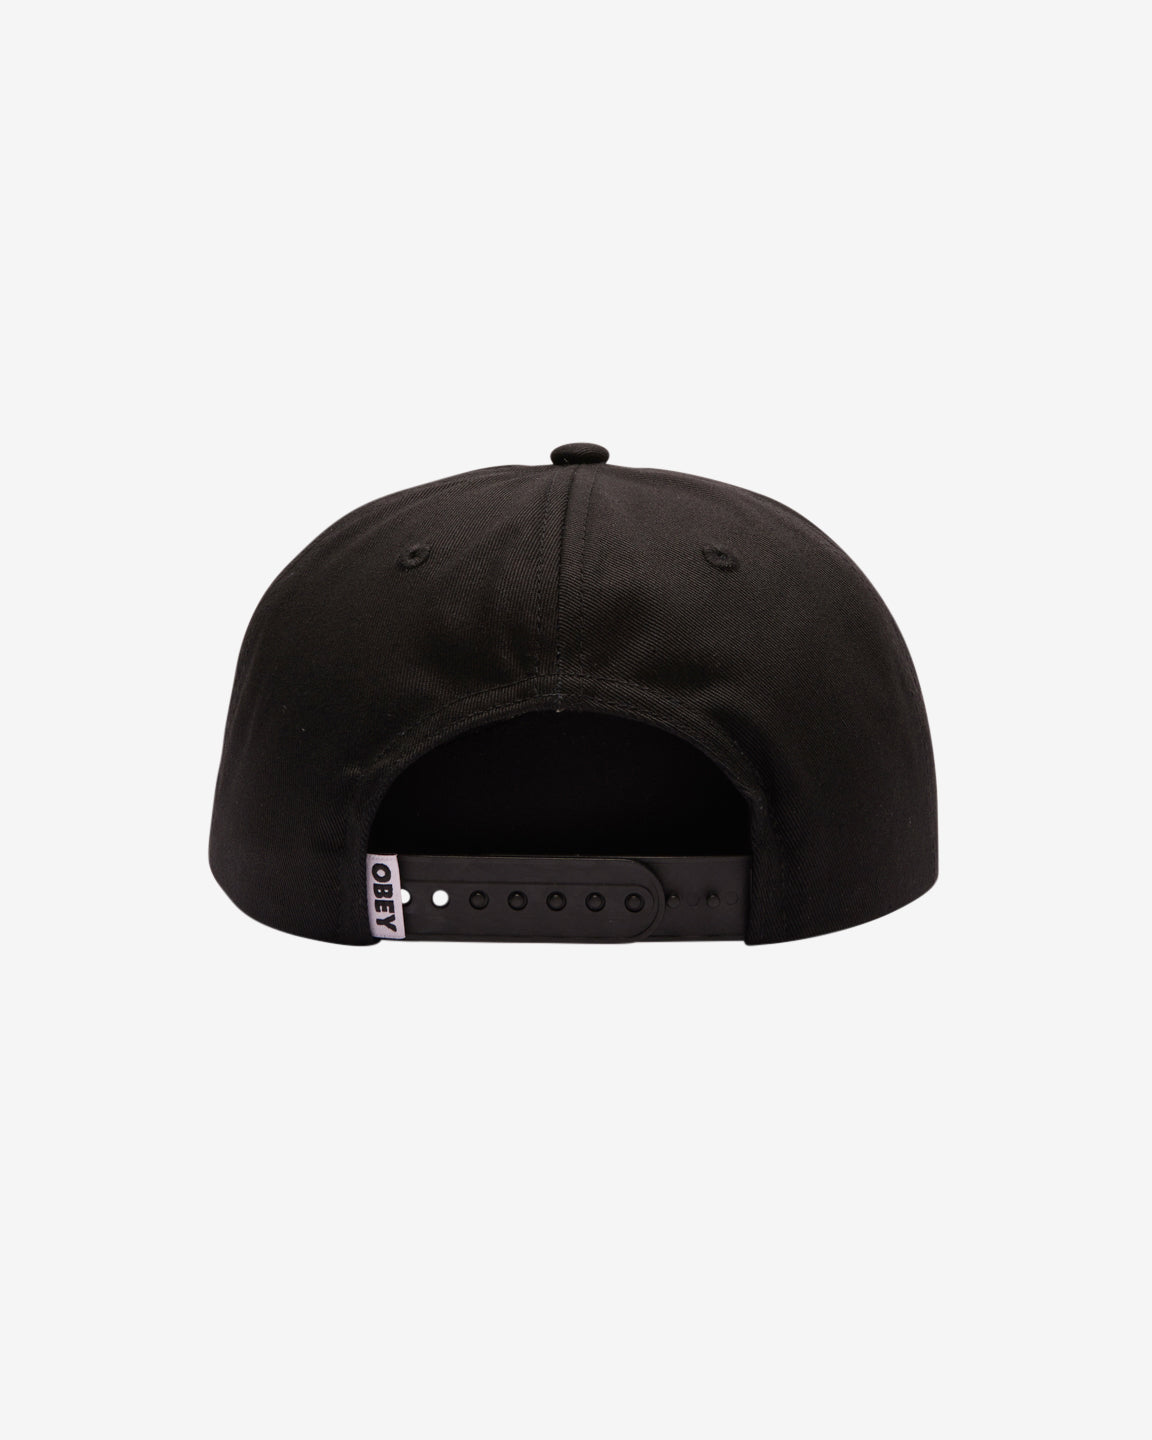 OBEY EXCELLENCE 5 PANEL SNAPBACK